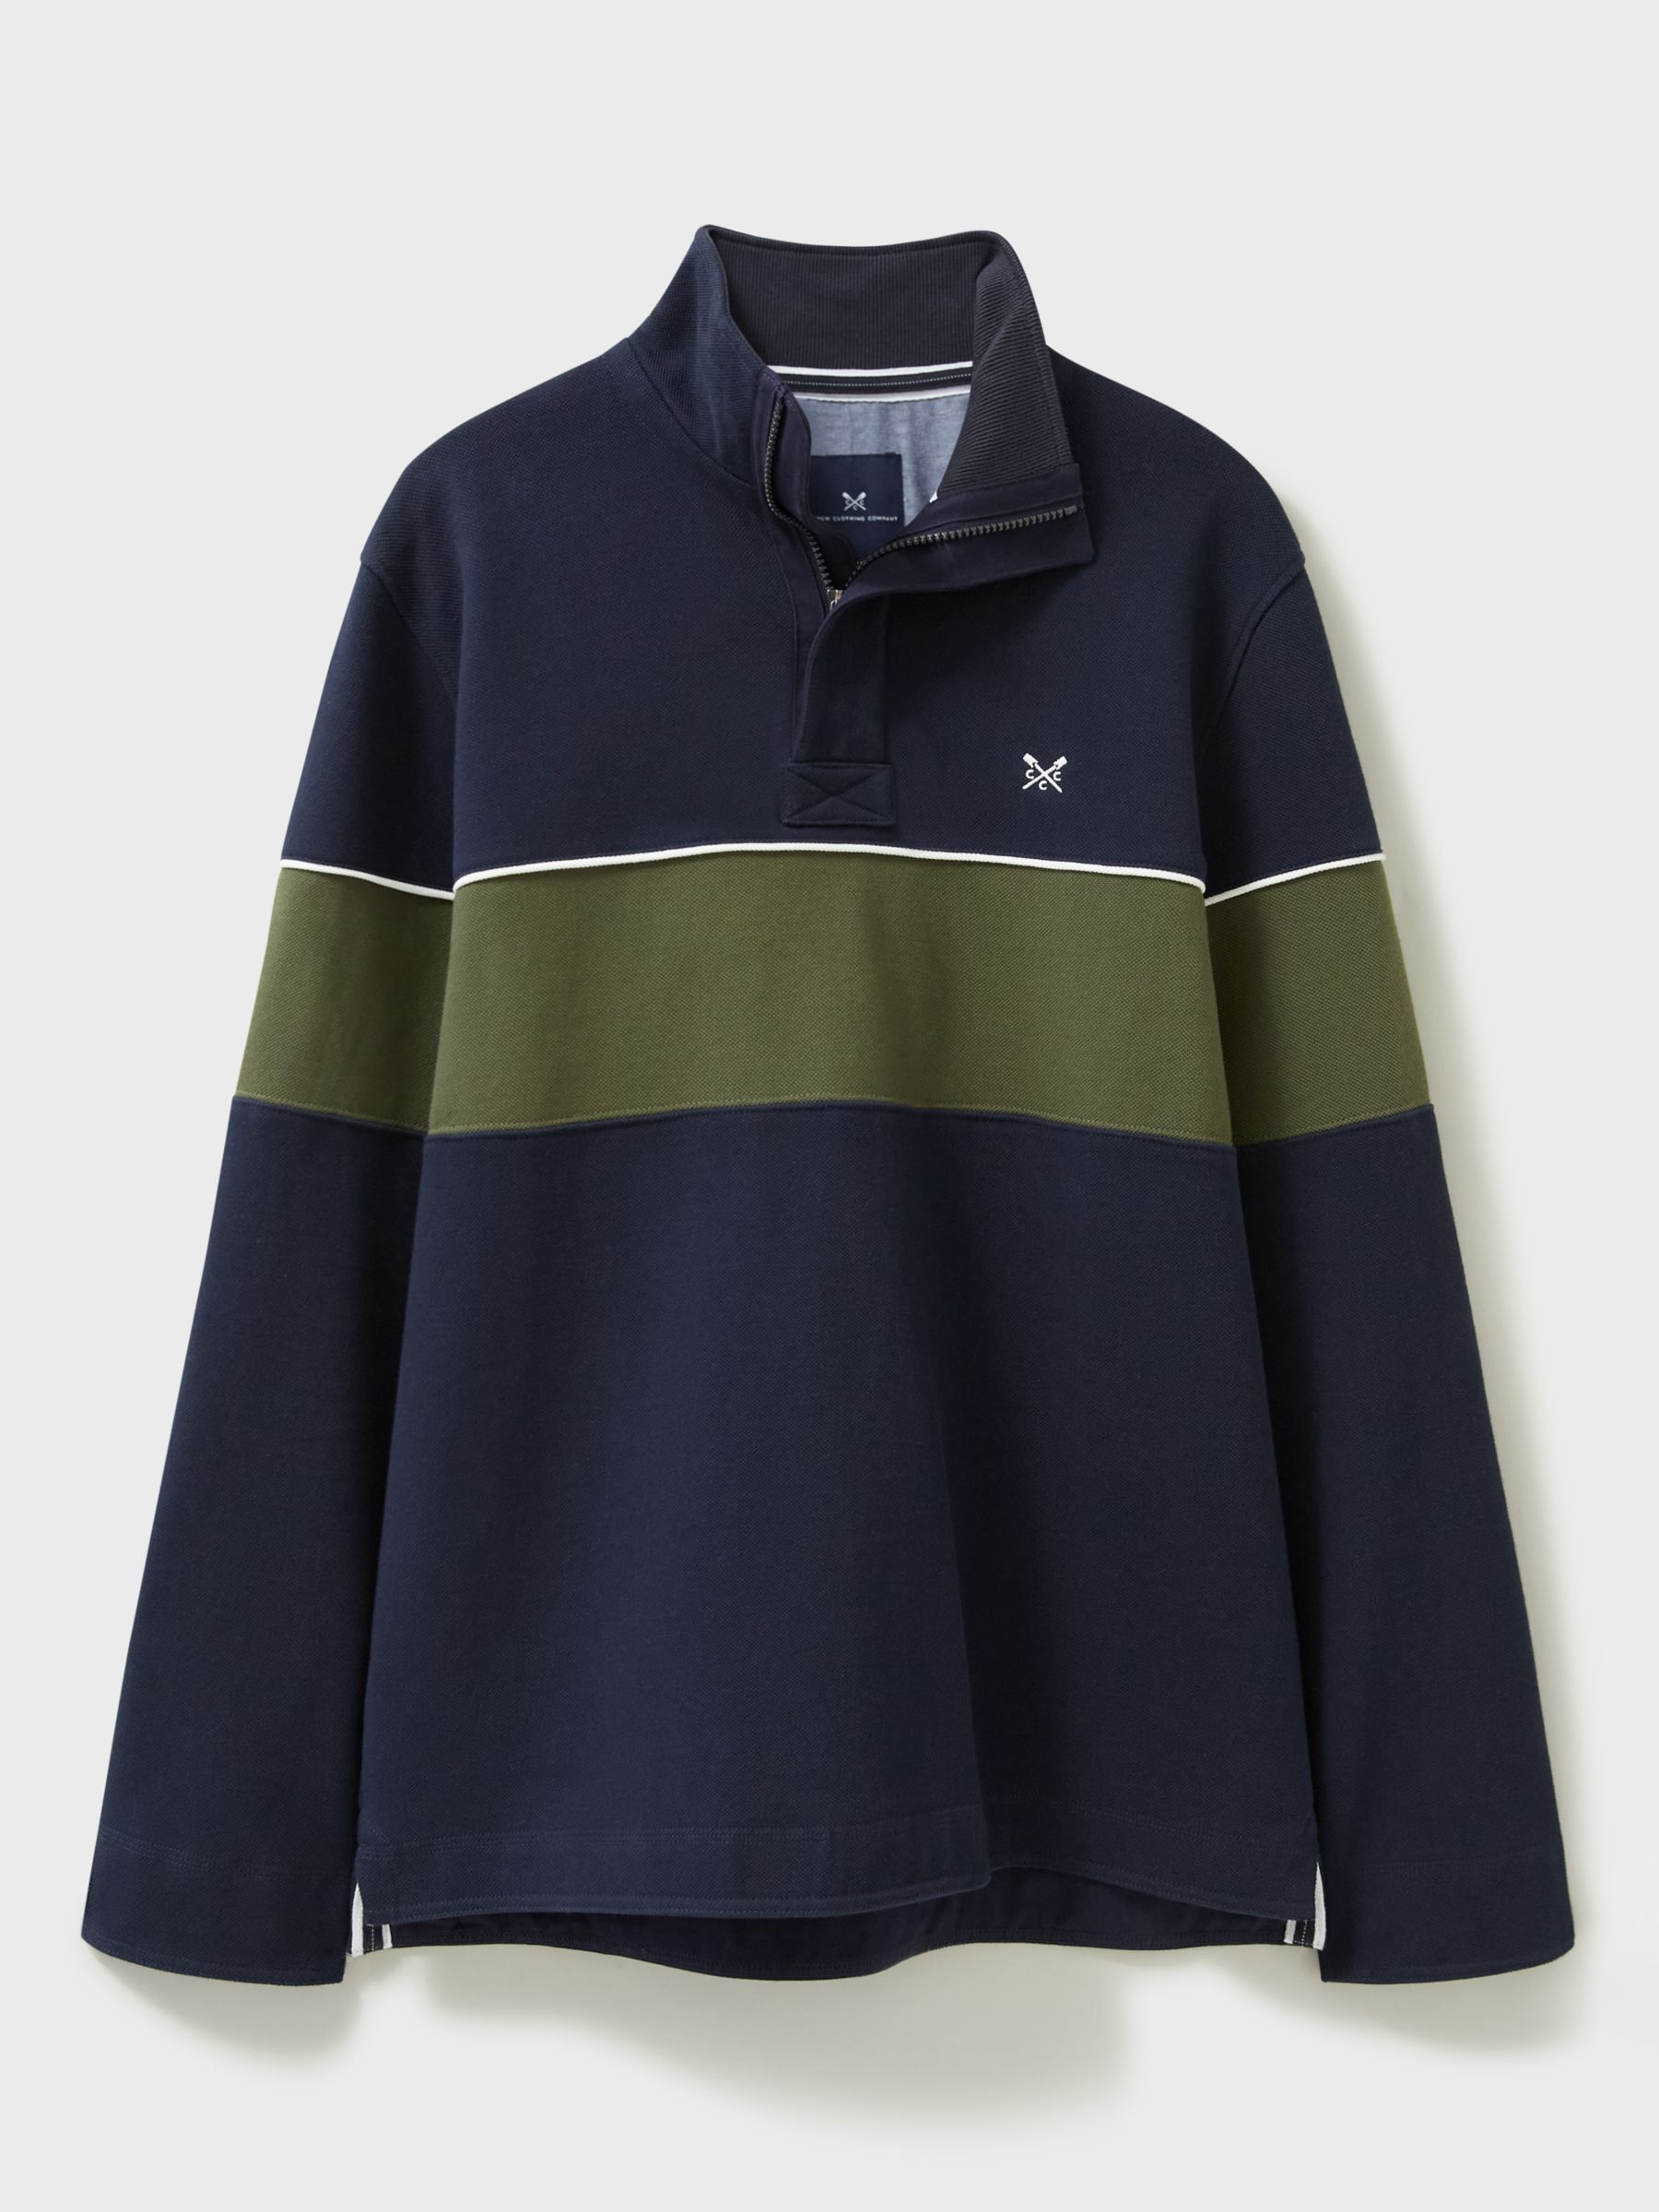 Crew Clothing Padstow Pique Stripe Jumper, Navy Blue, XS